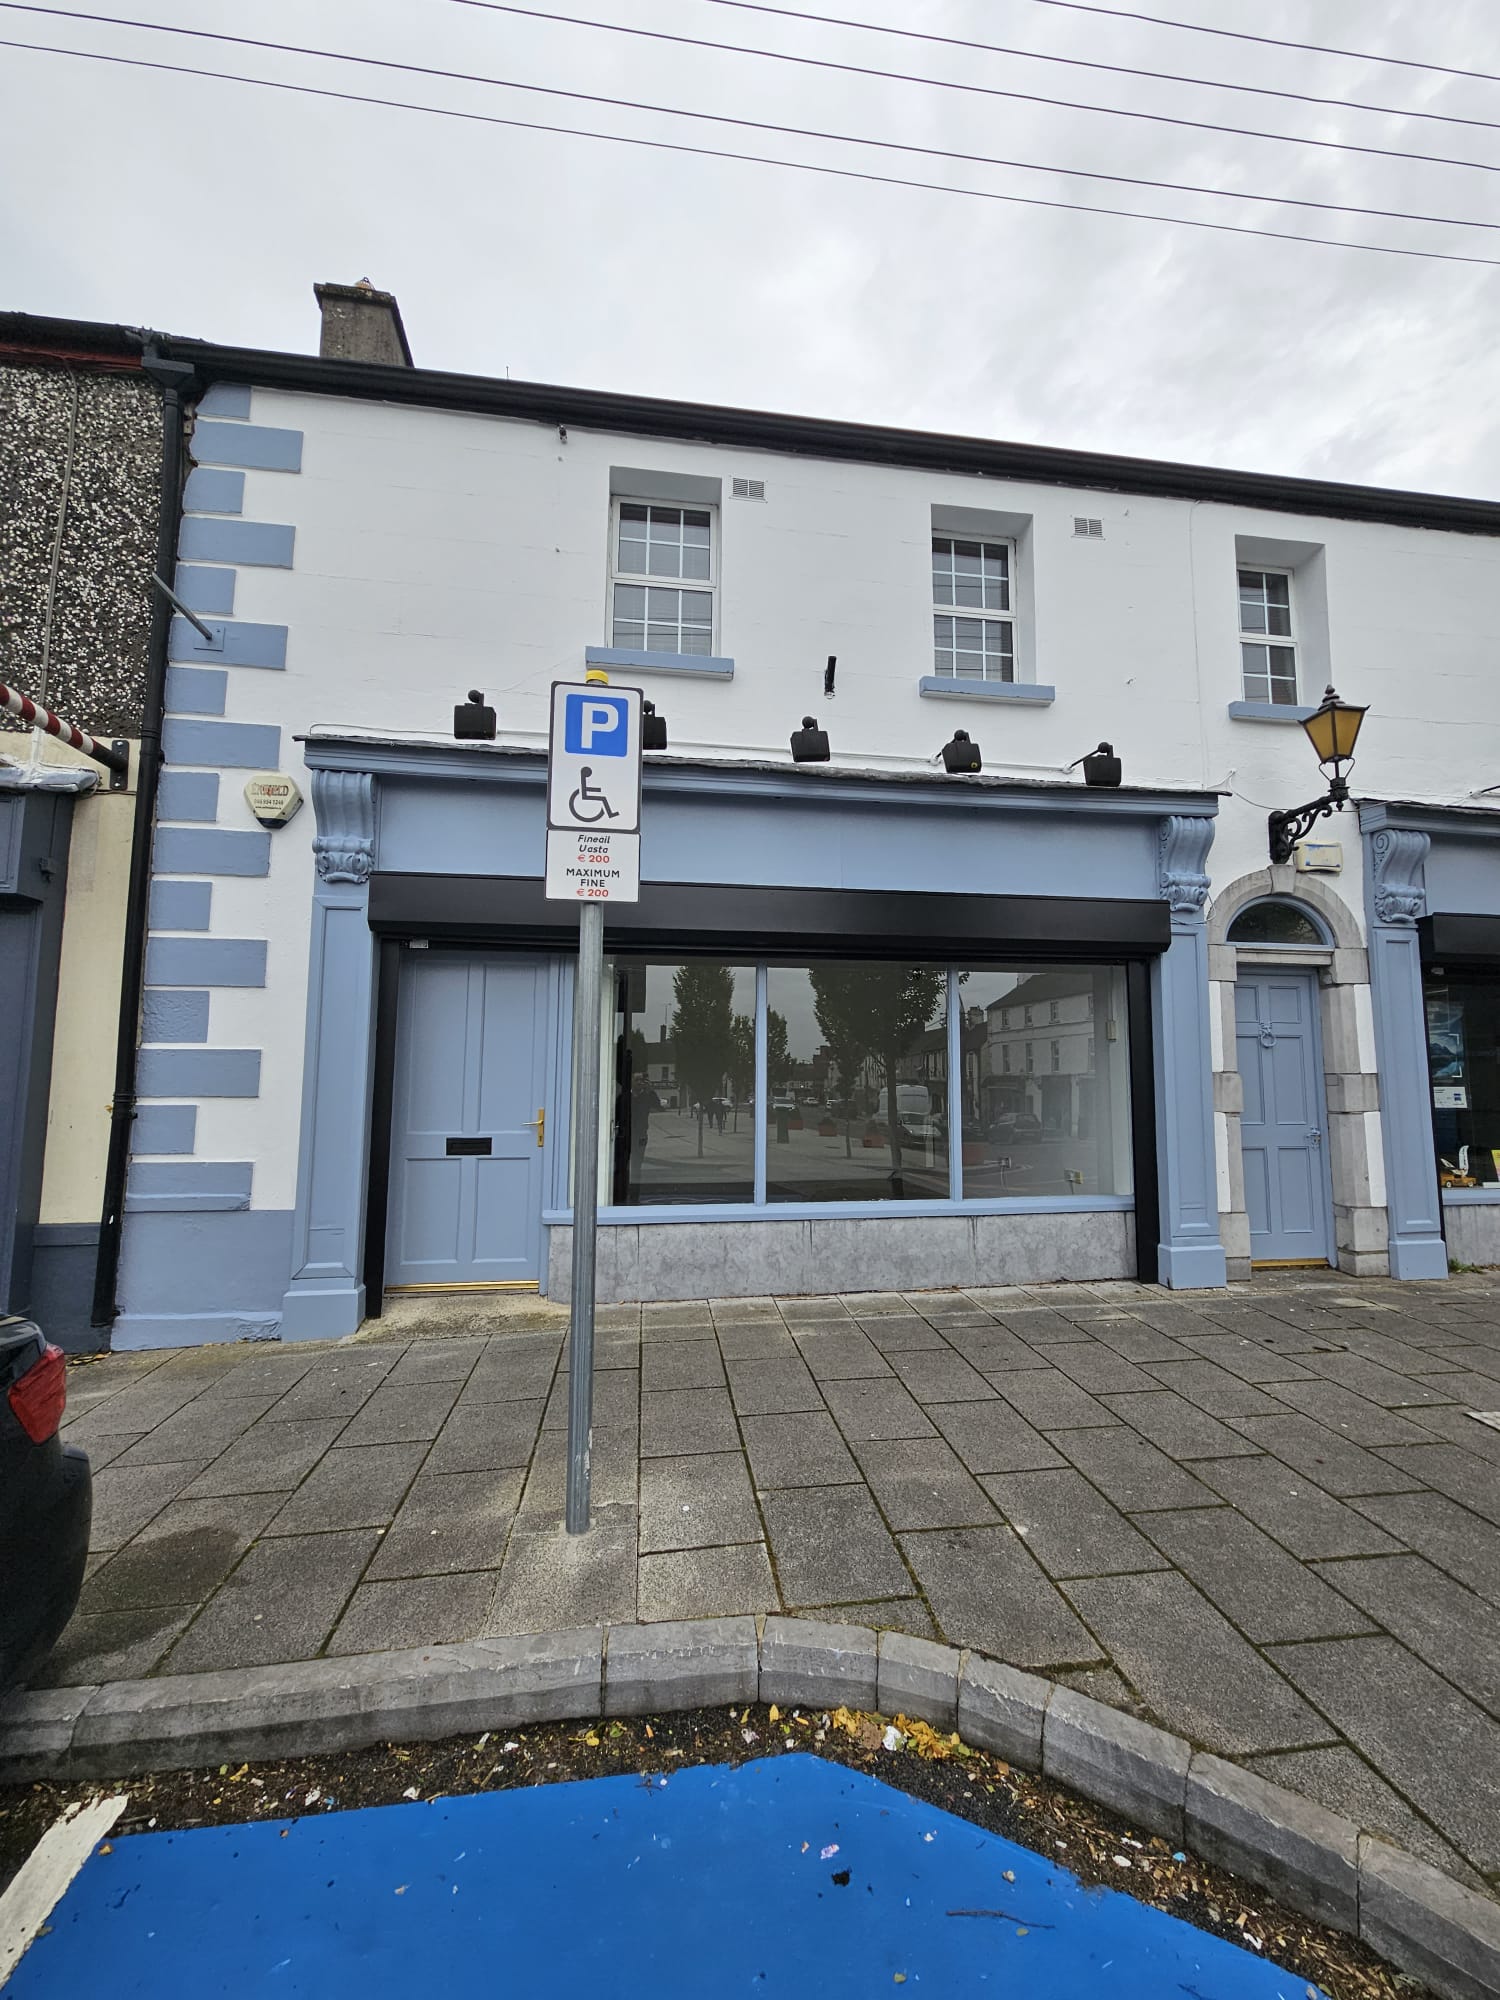 Shop 1, The White House, OConnell Square, Edenderry, Co. Offaly R45YR13